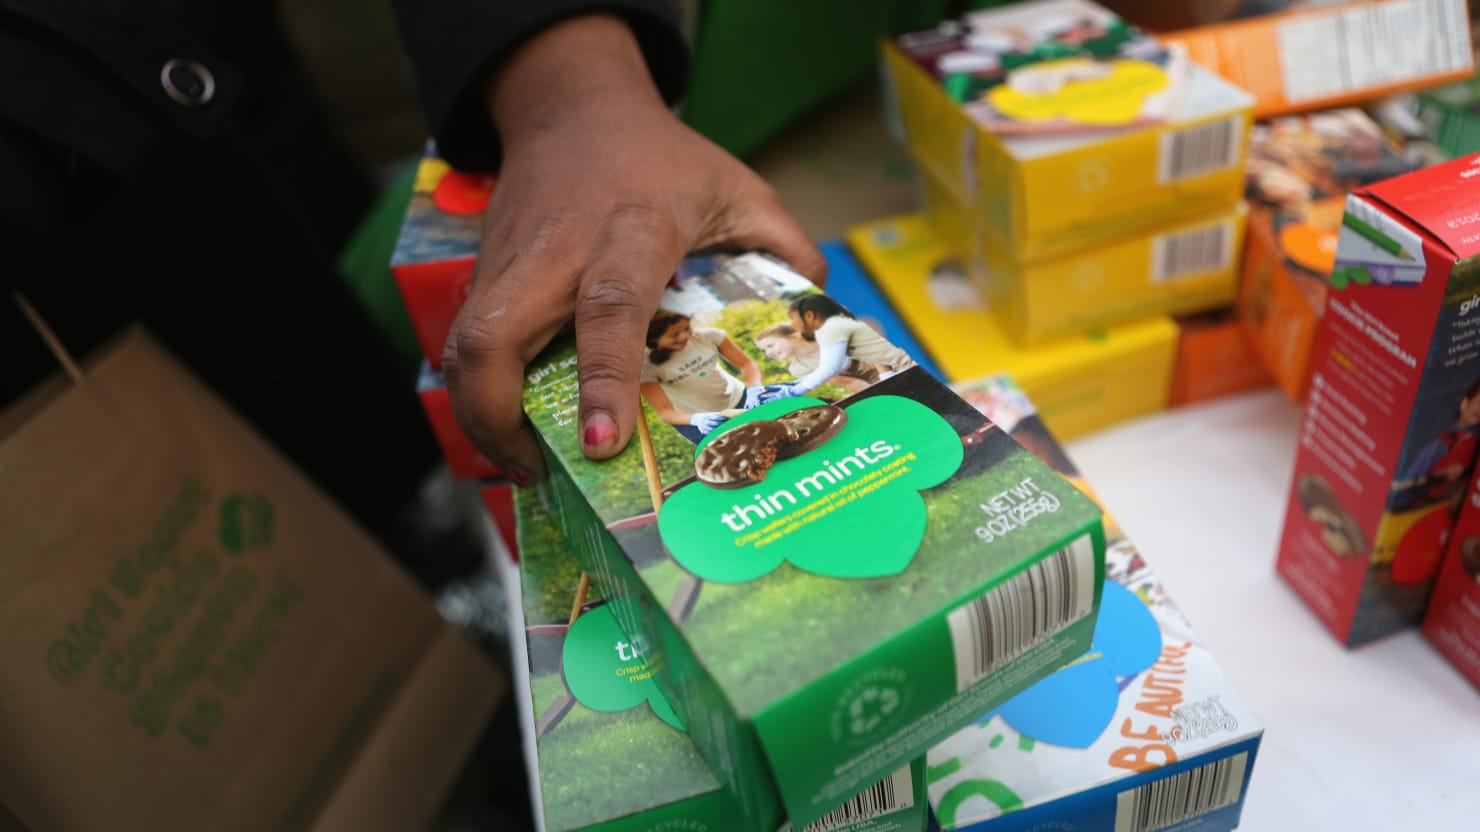 A hidden link has been found between child labor and Girl Scout cookies